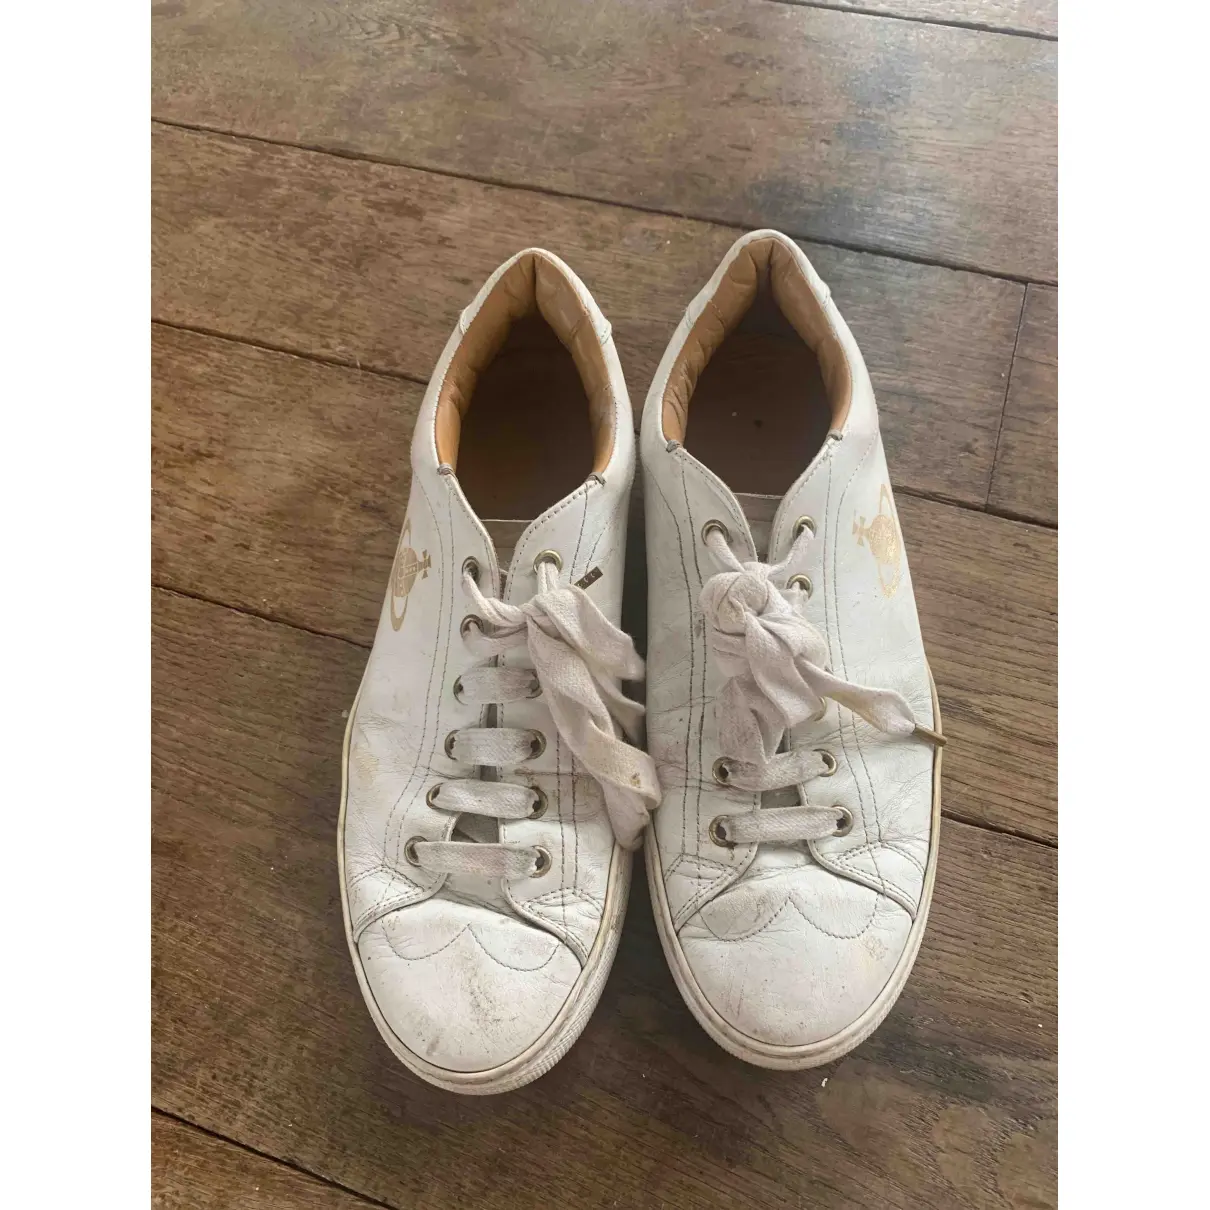 Buy Vivienne Westwood Leather trainers online